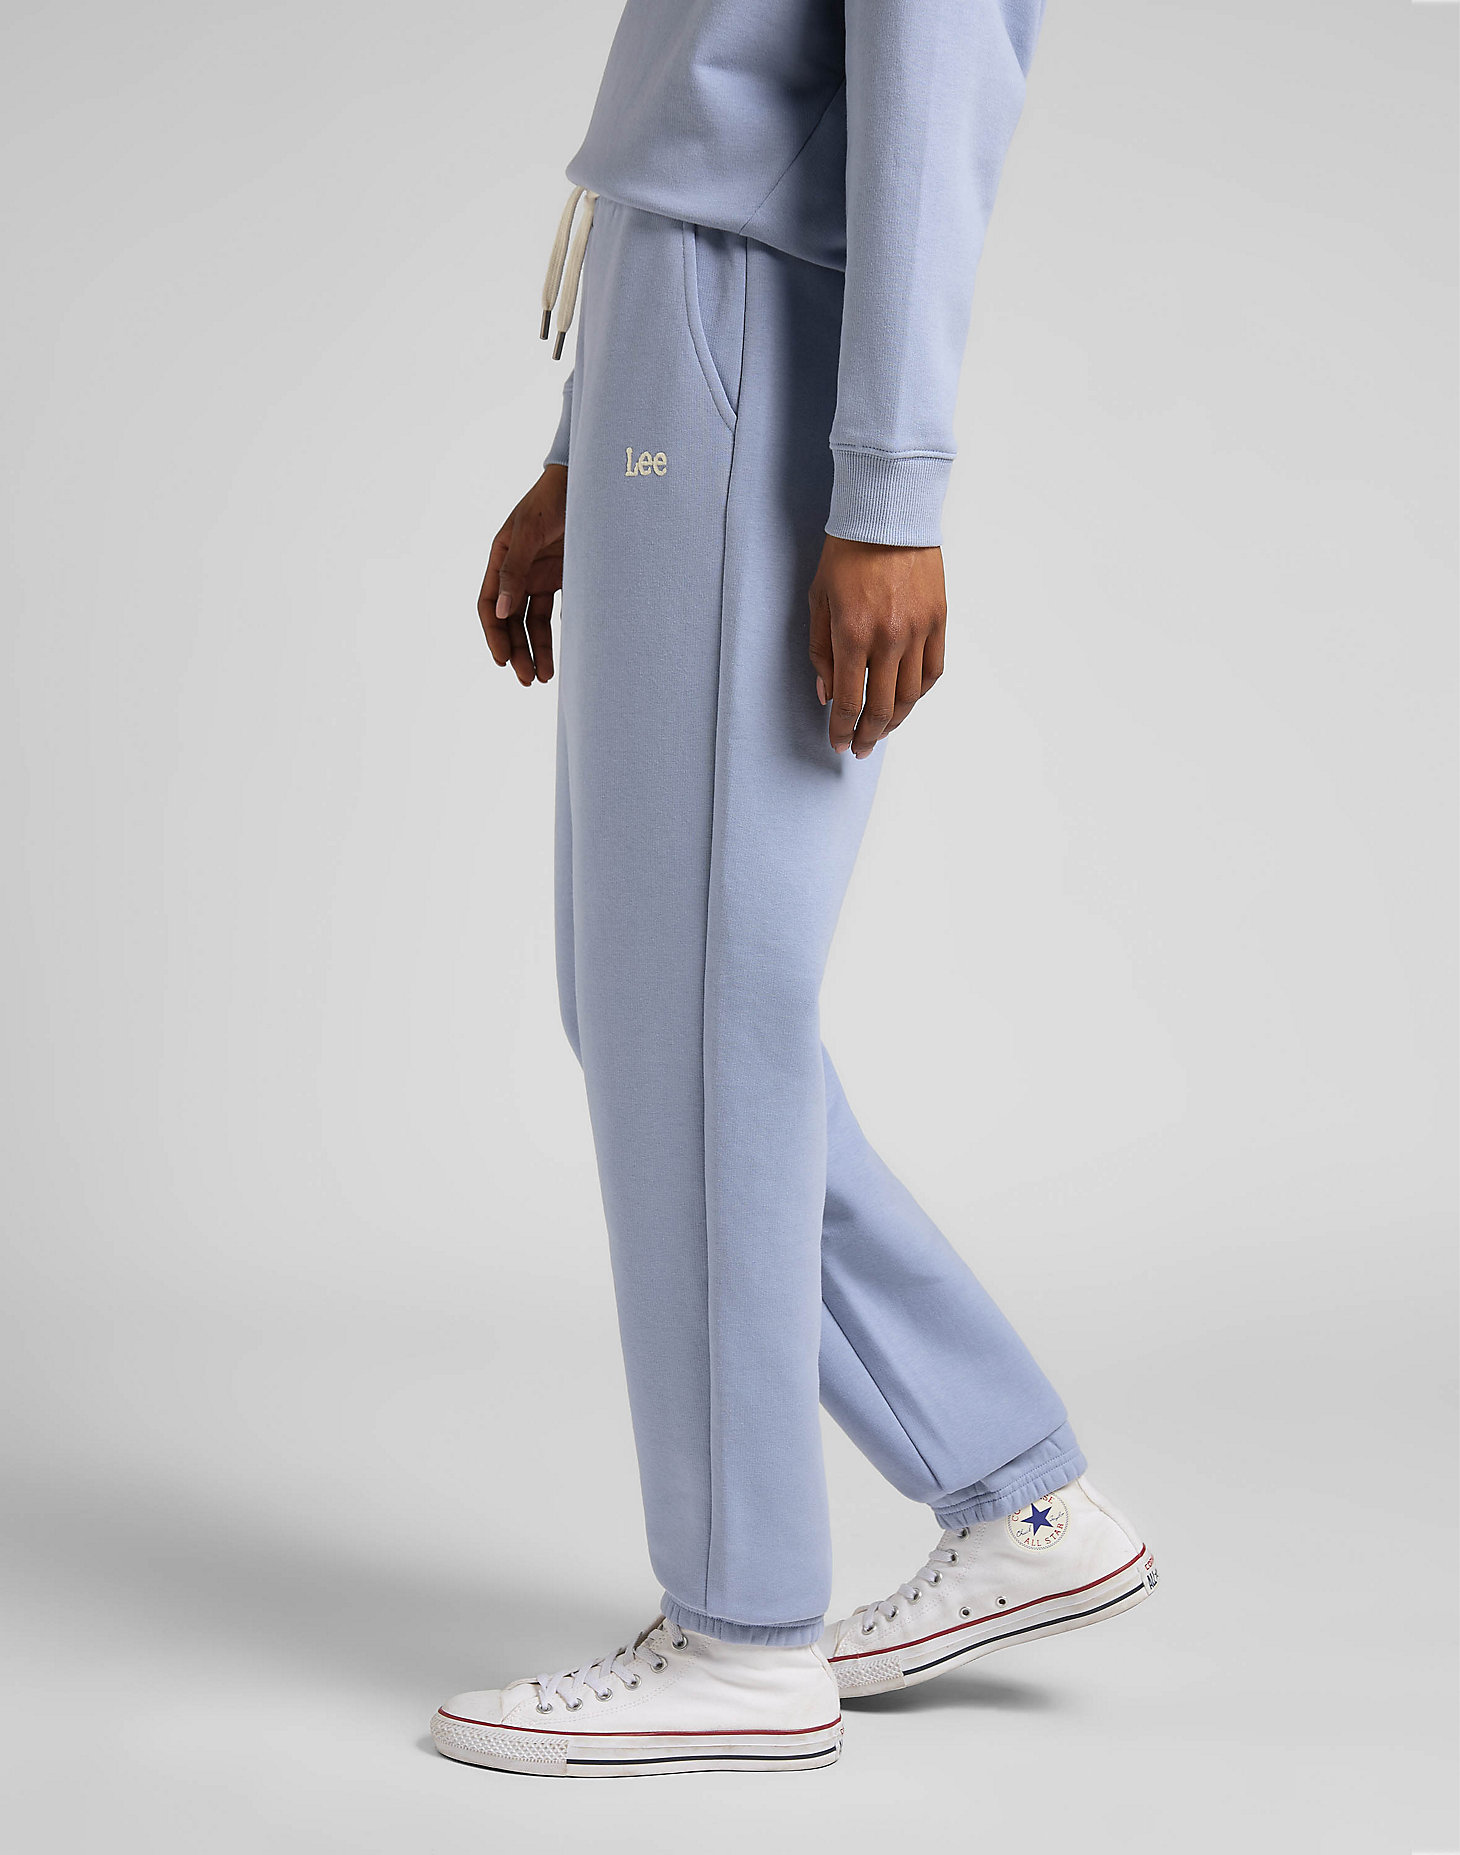 Relaxed Sweatpants in Parry Blue alternative view 3